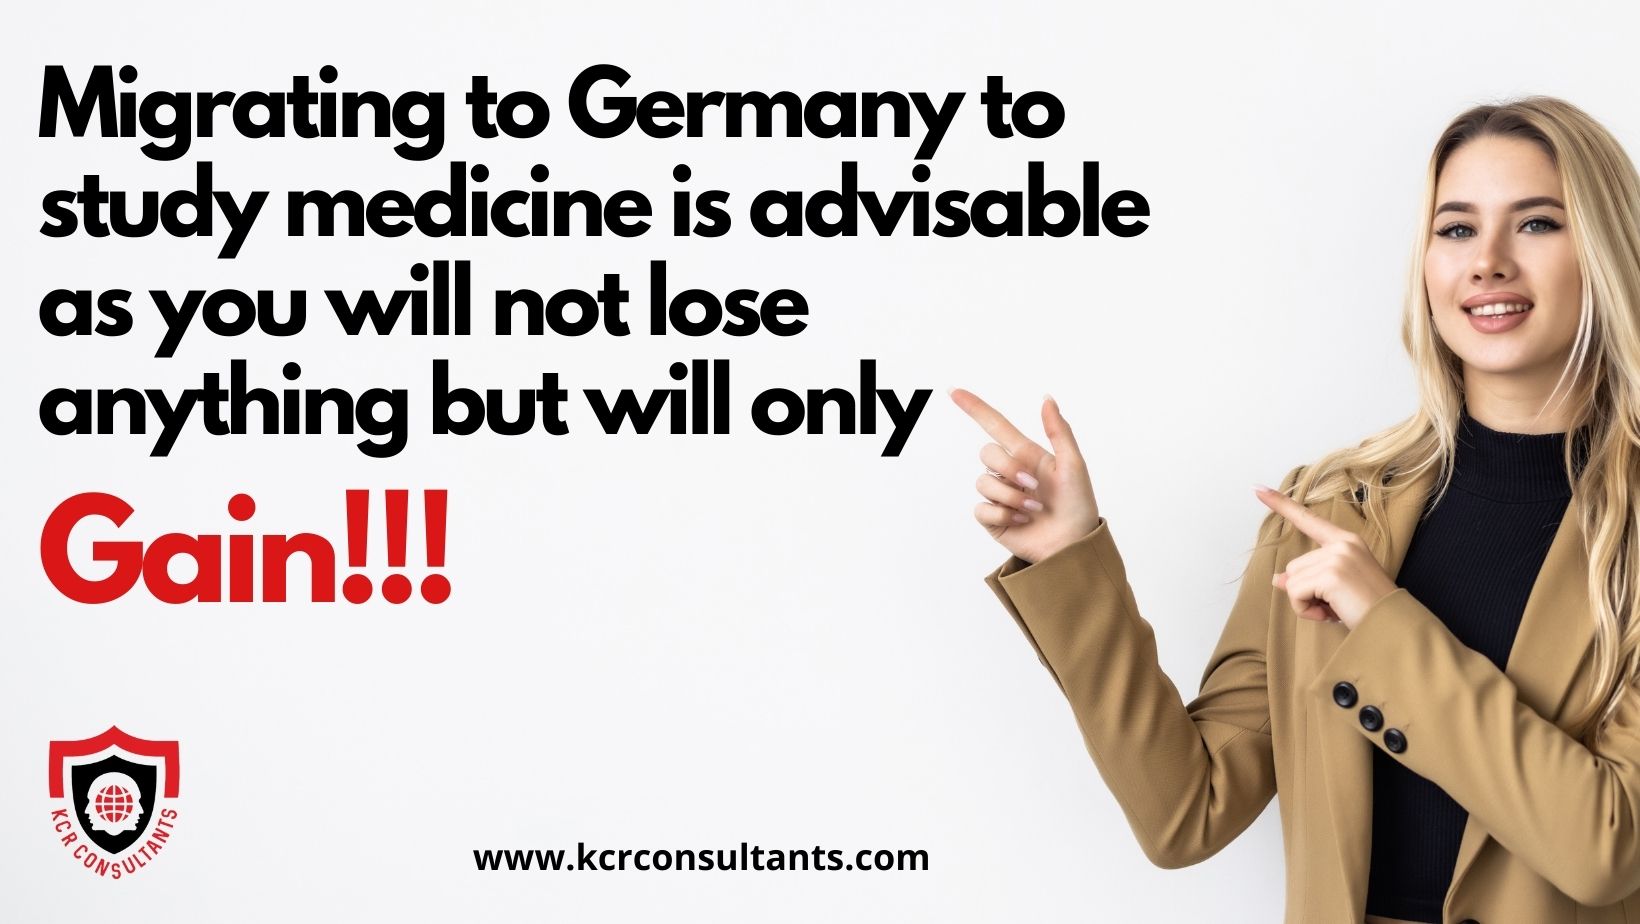 Migrating to study medicine in Germany is advisable as you will not lose anything but will only gain.